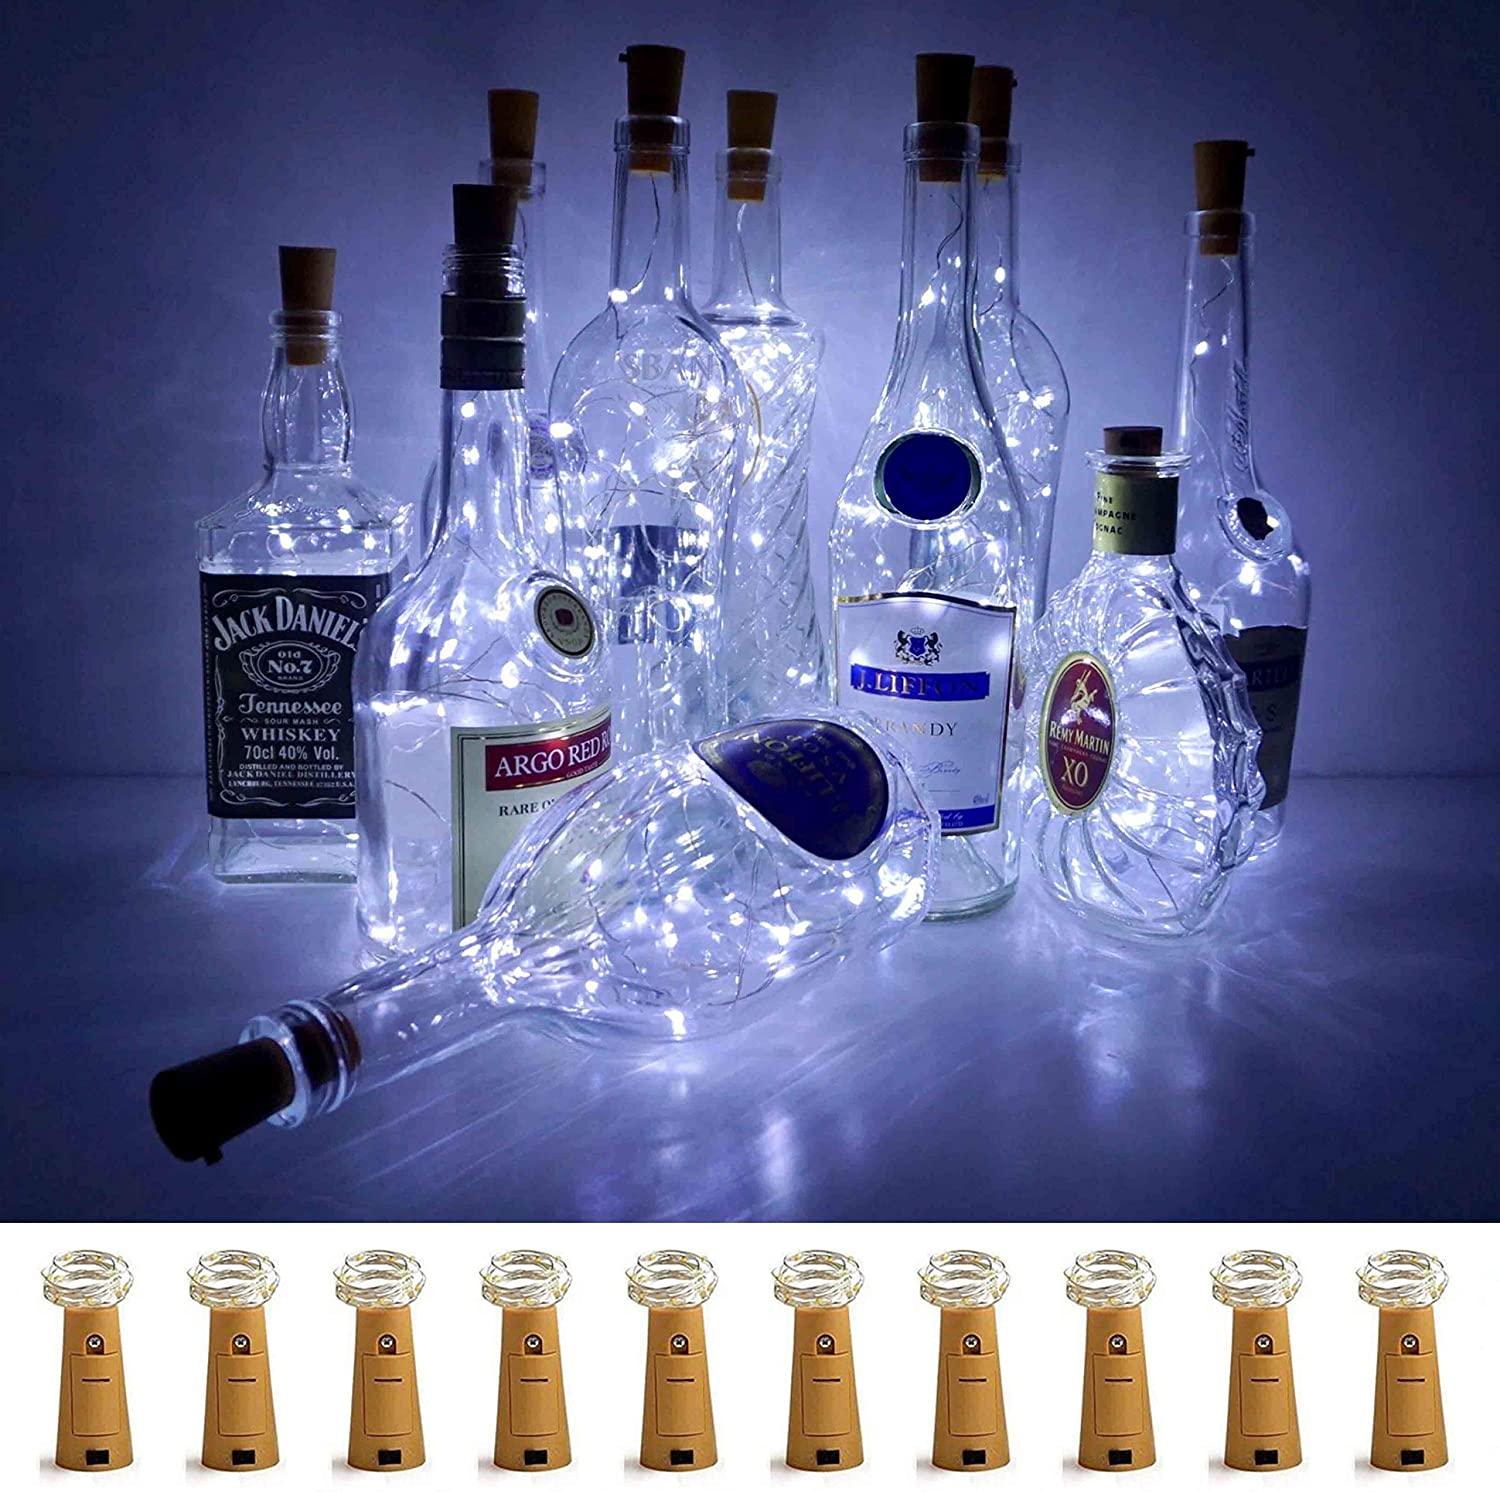 Wine Bottle Cork Lights Mini Copper Wire Lights for Bedroom Decor - If you say i do